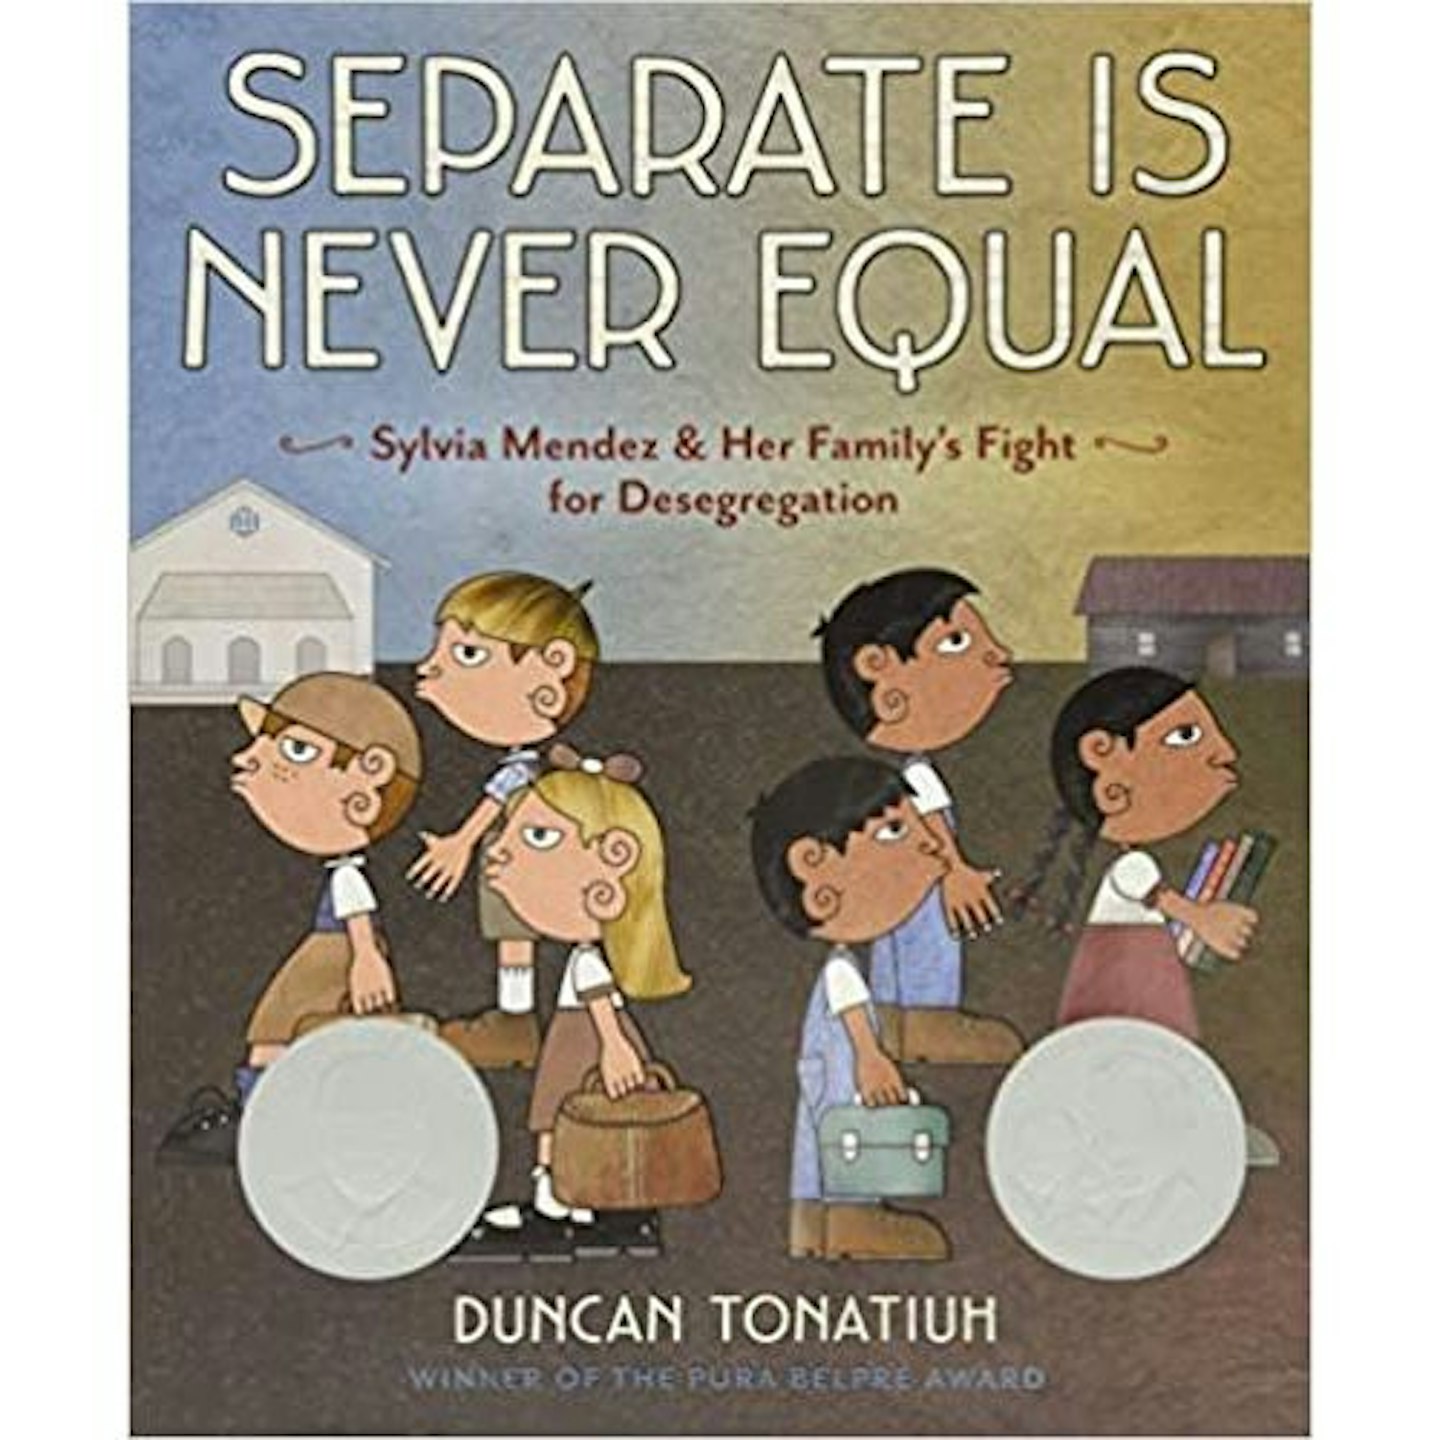 Separate Is Never Equal by Duncan Tonatiuh